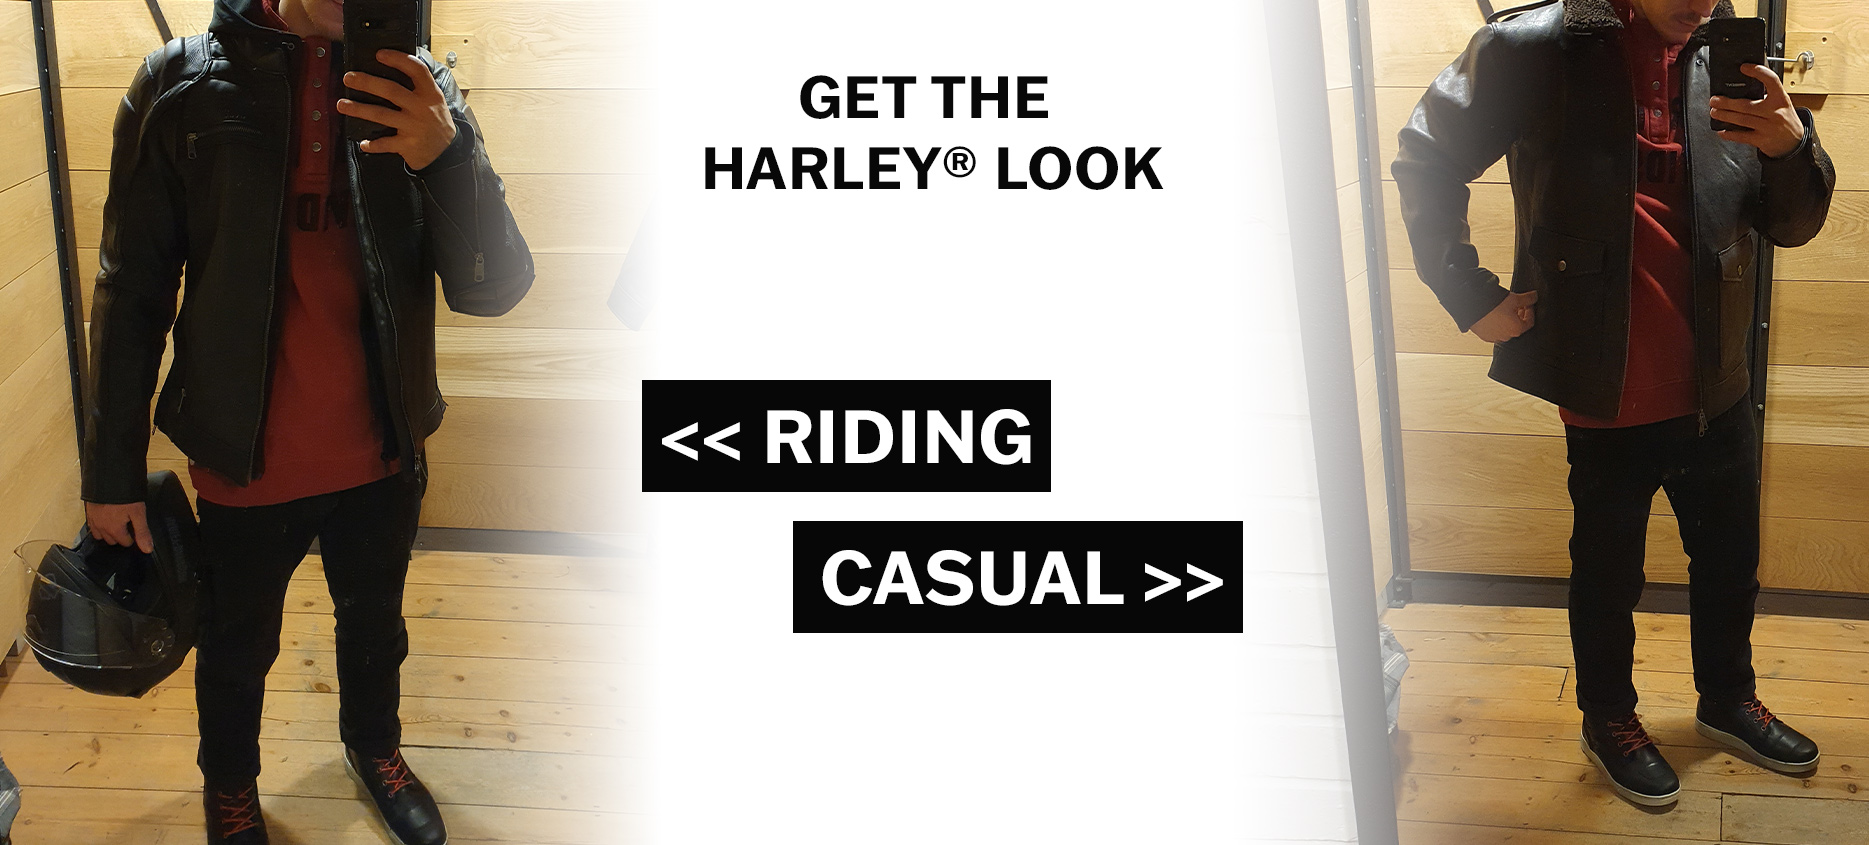 GET THE LOOK - Harley-Davidson Riding and Casual Banner